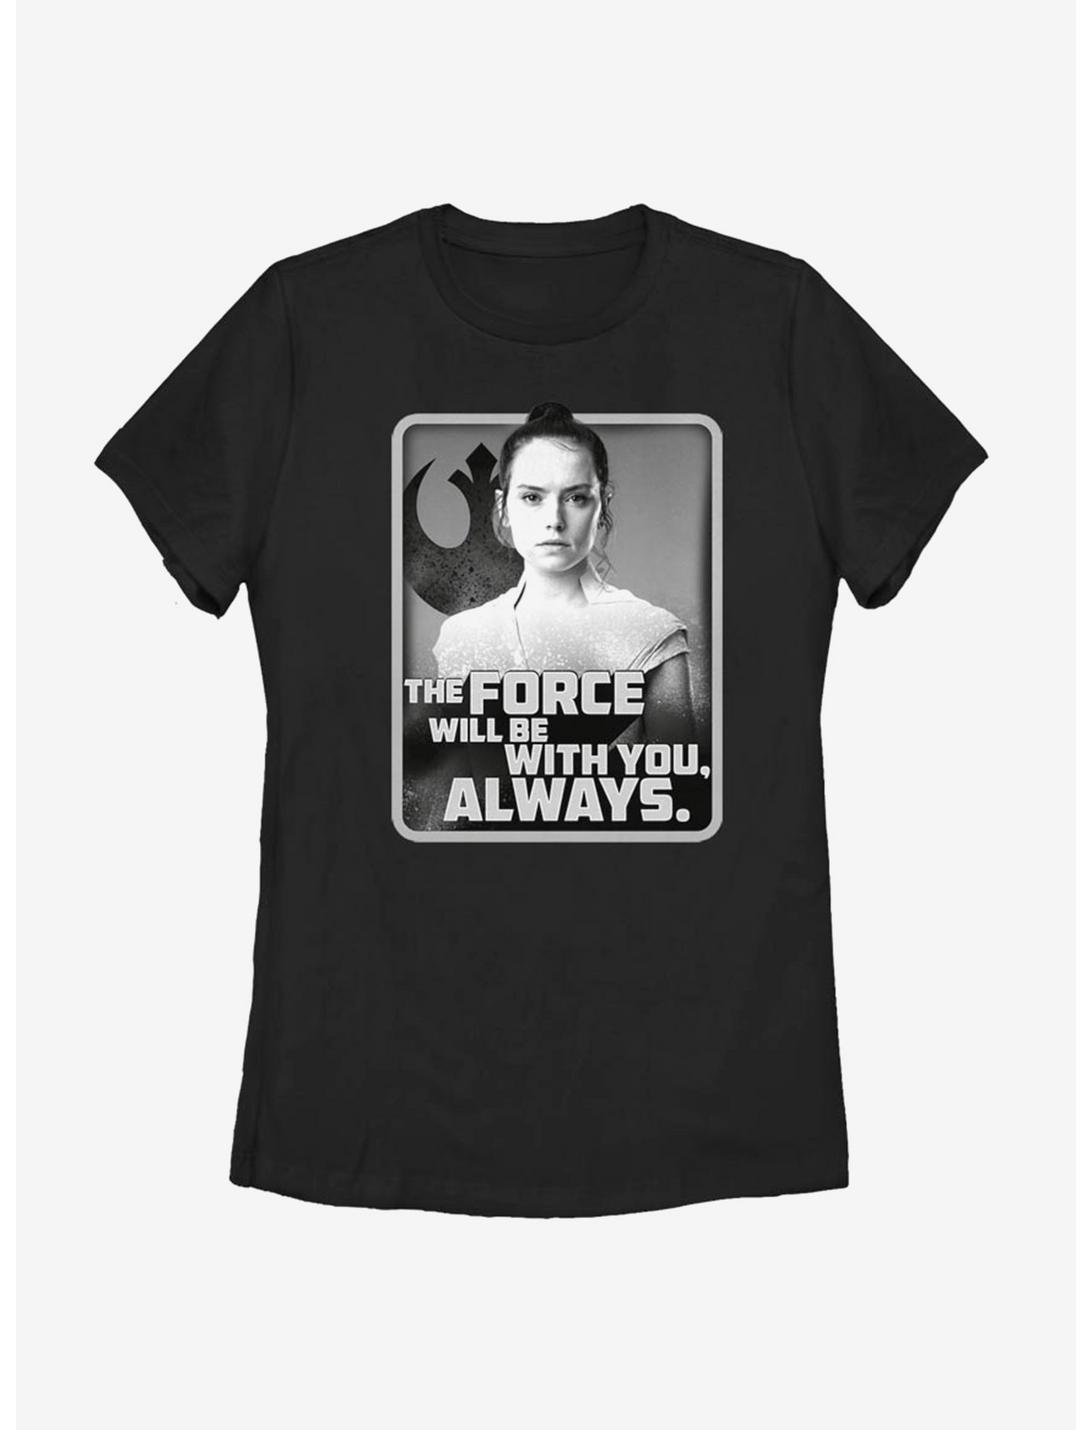 Star Wars Episode IX The Rise Of Skywalker With You Rey Womens T-Shirt, BLACK, hi-res